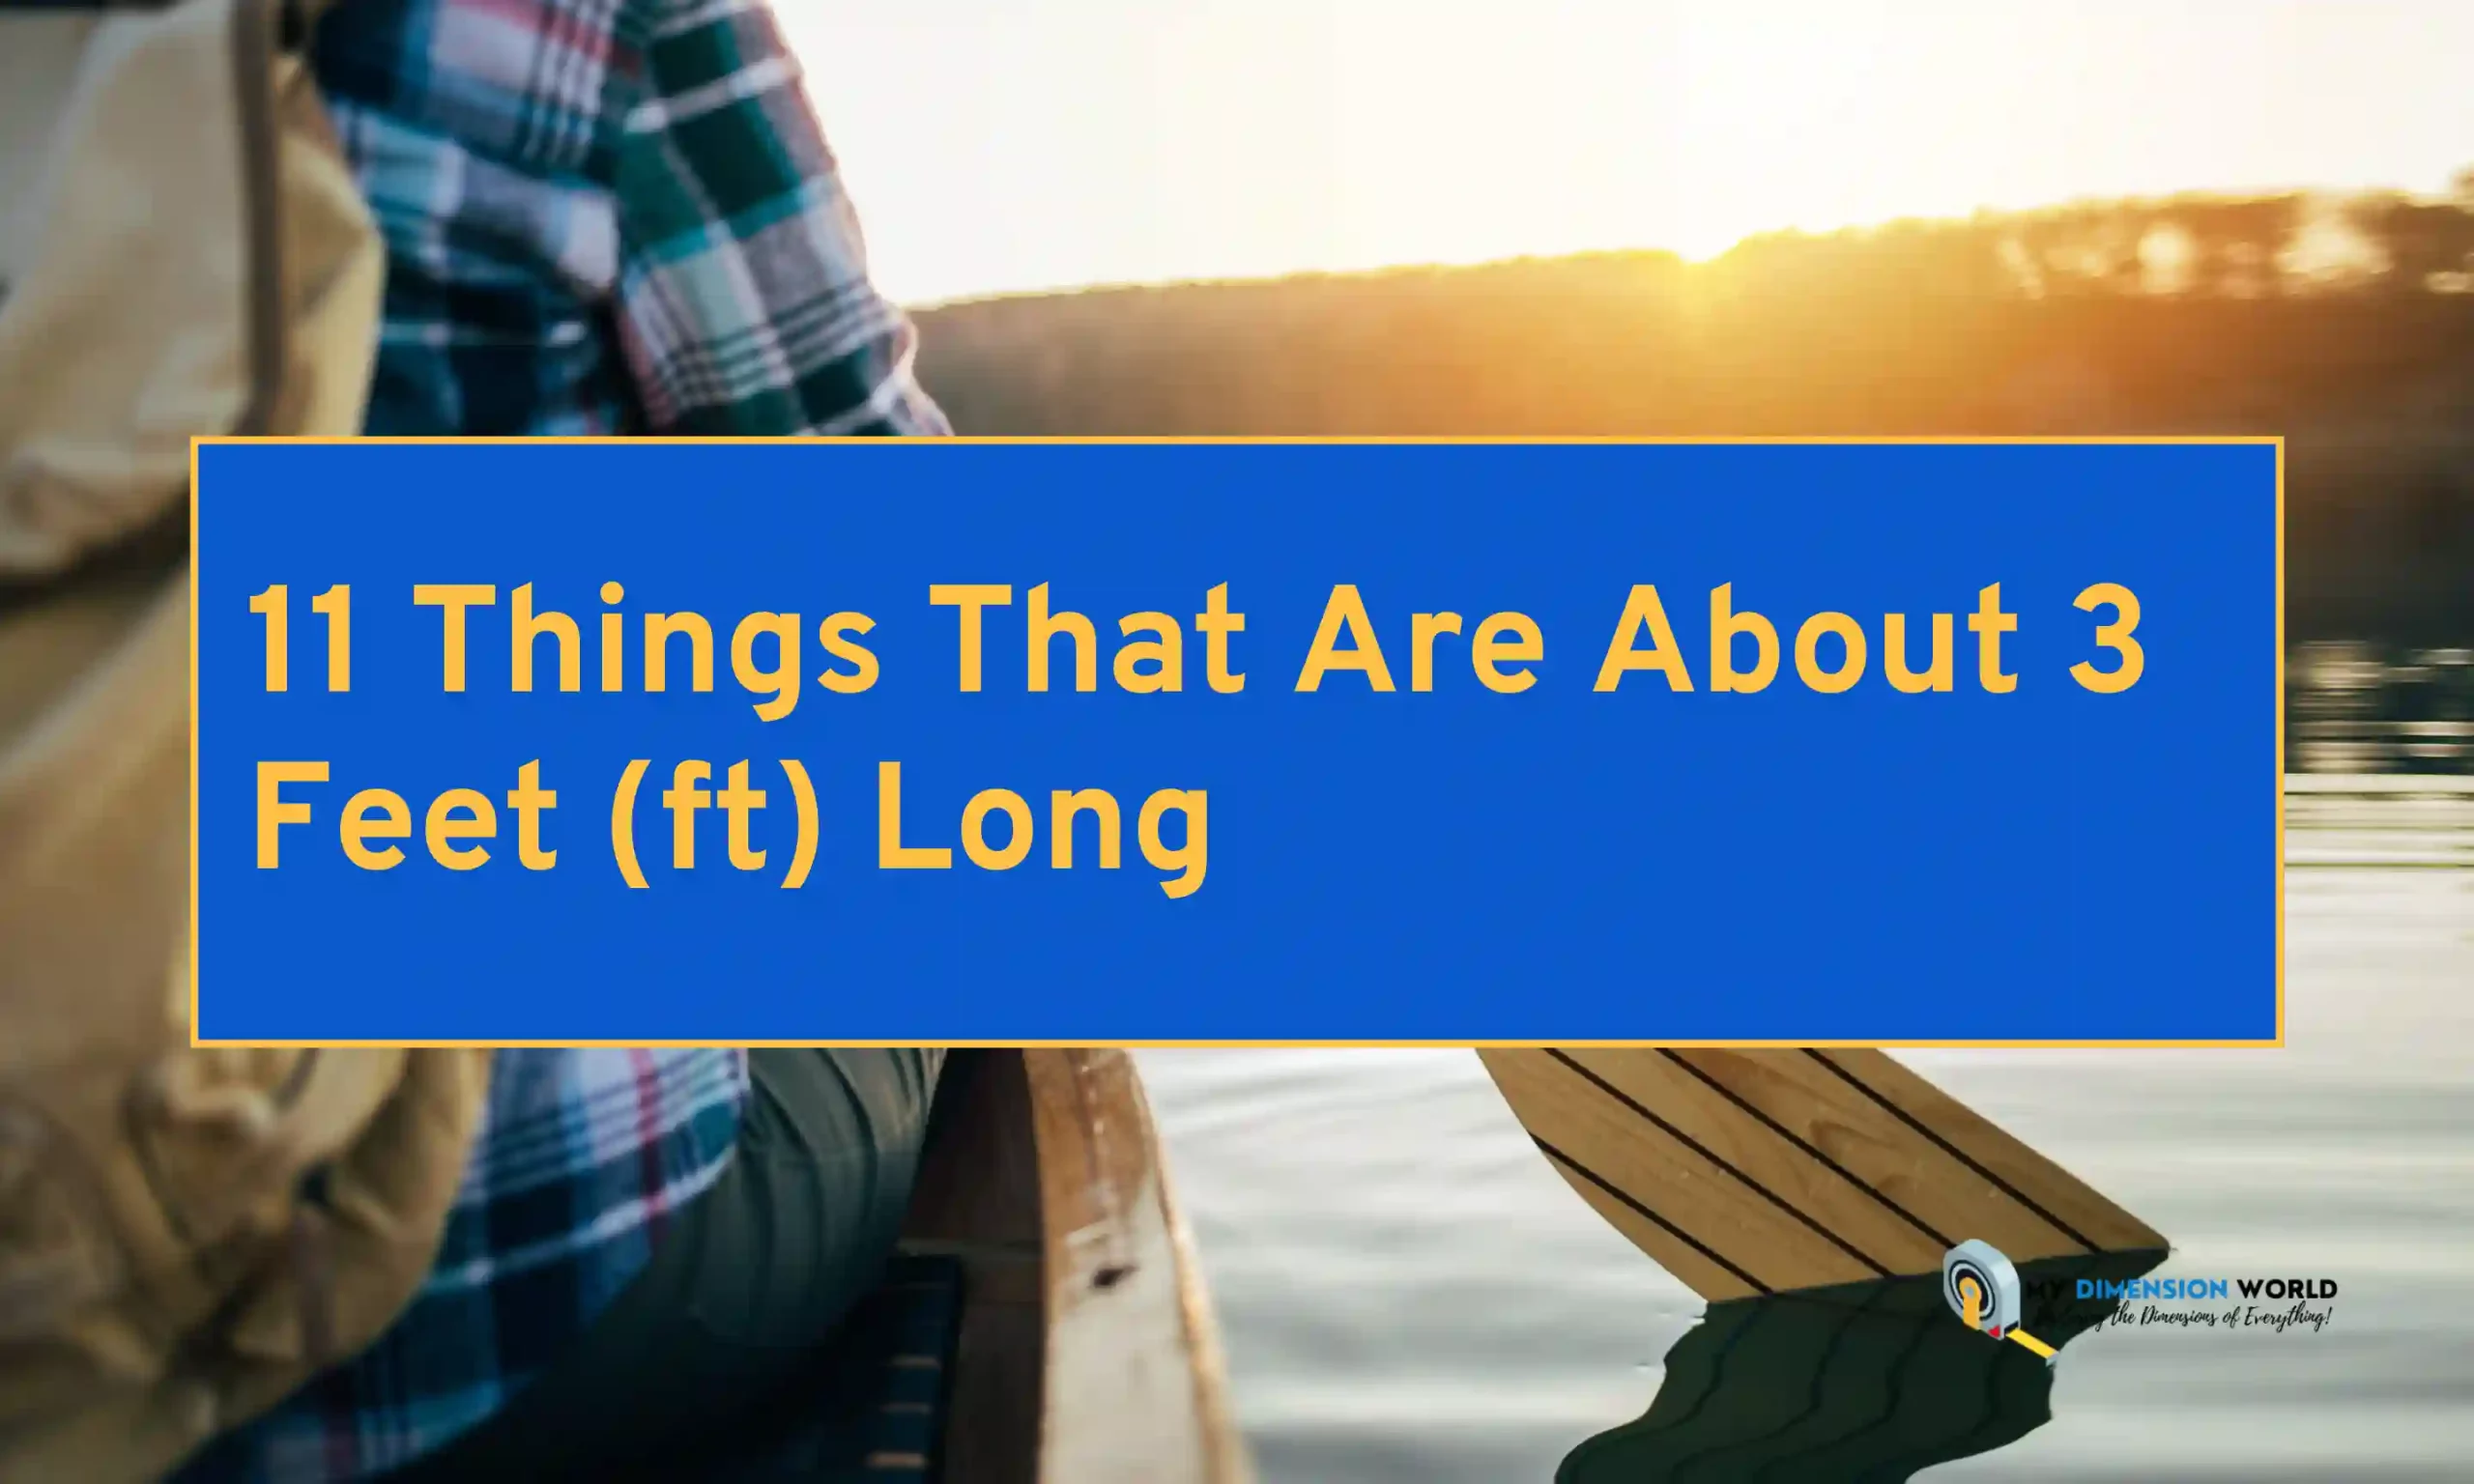 11 Things That Are About 3 Feet (ft) Long